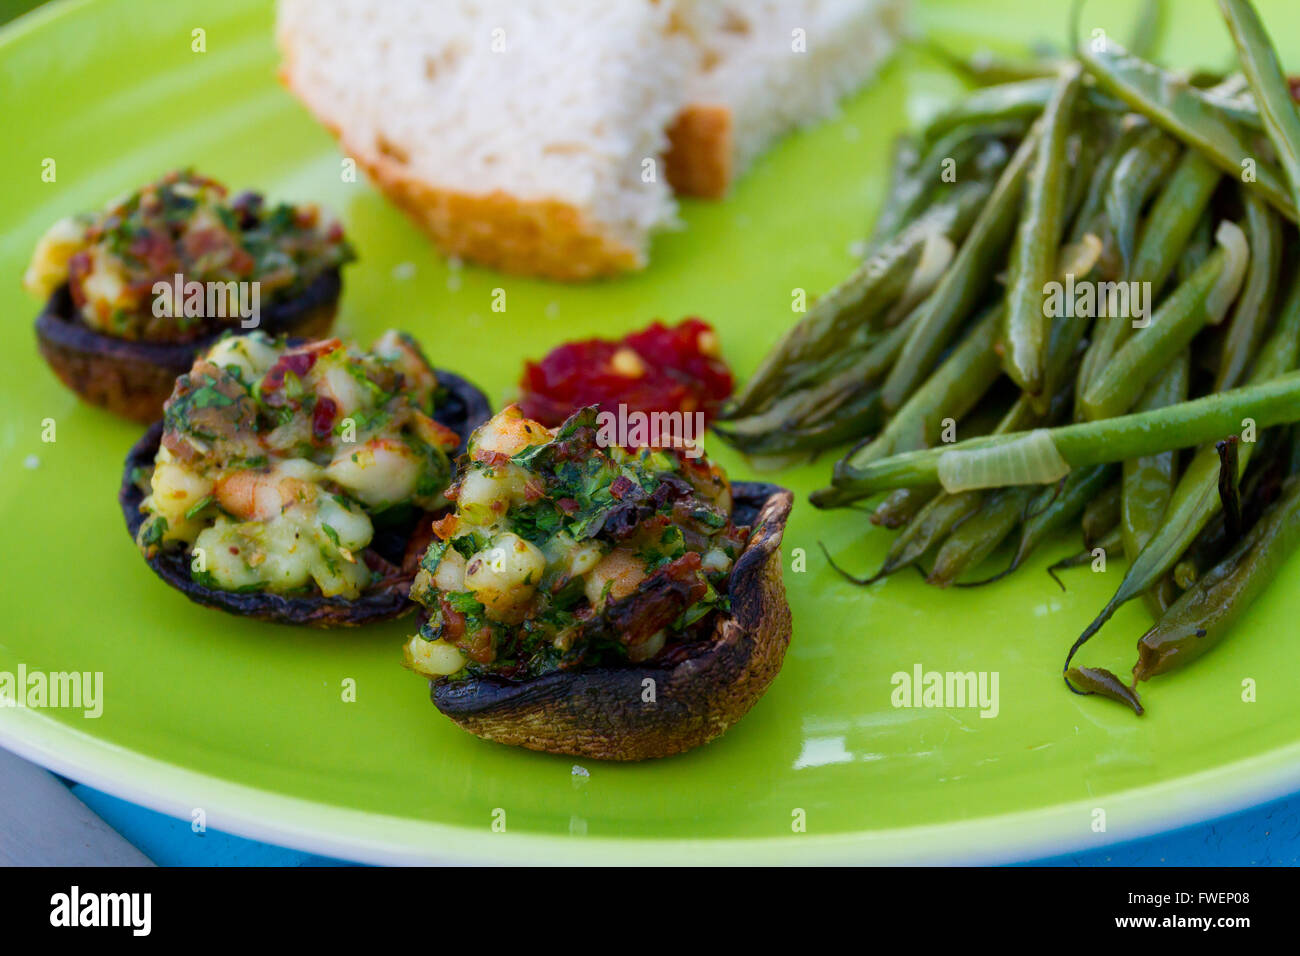 This gourmet meal of stuffed mushrooms and green beans served on a green plate with some white bread. This is dinner but the ima Stock Photo